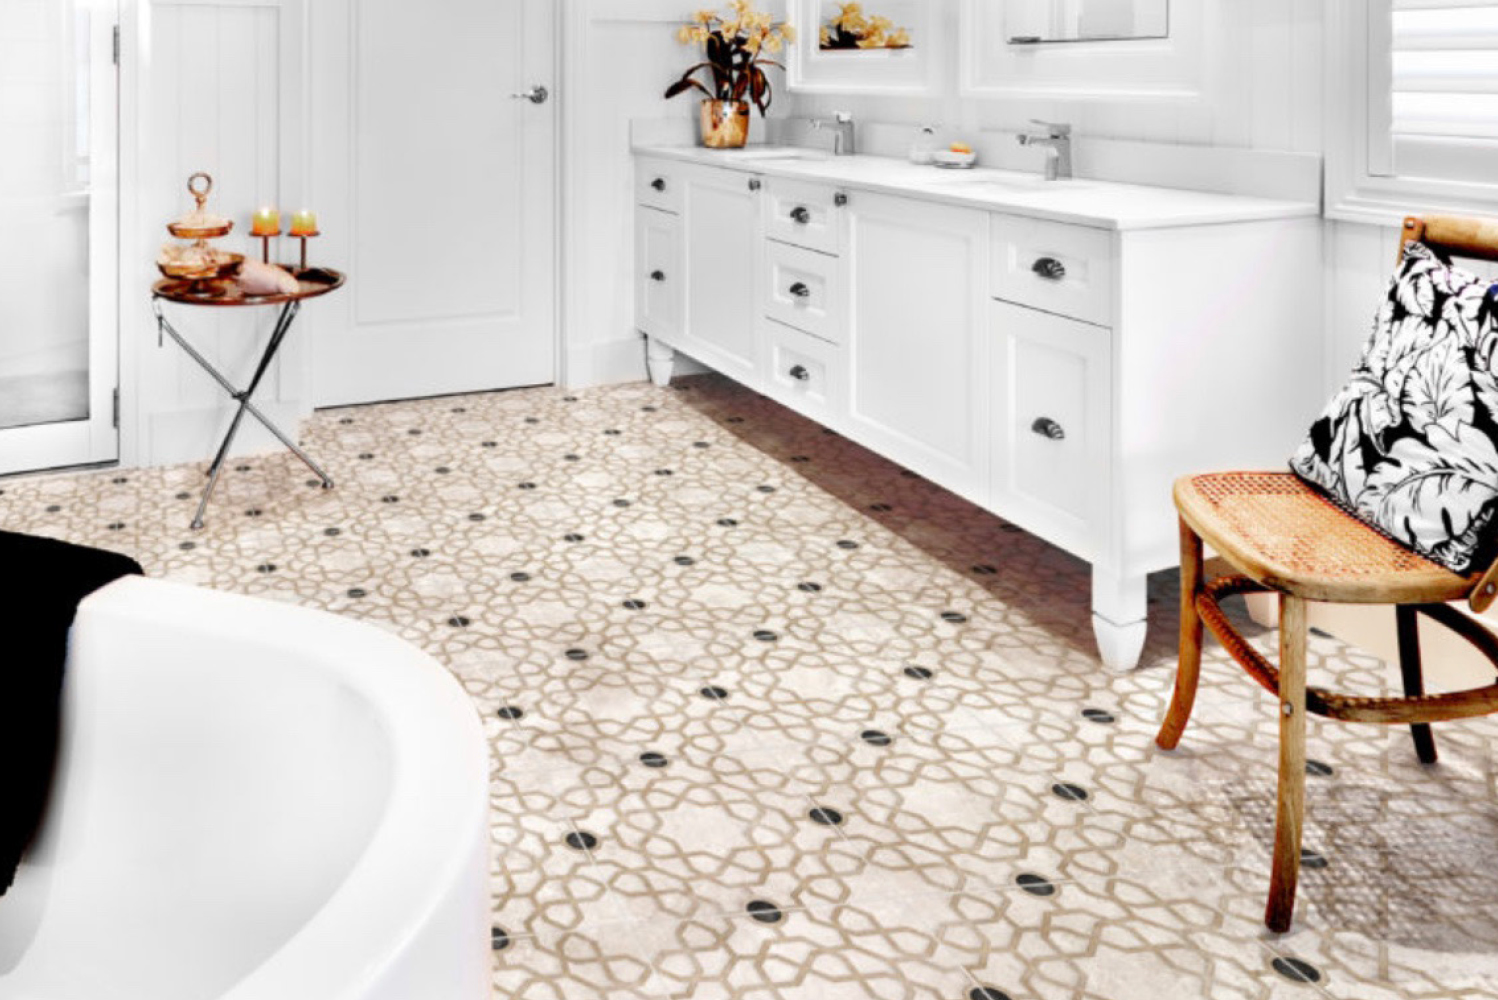 Introducing the Medina tiles from StoneImpressions 